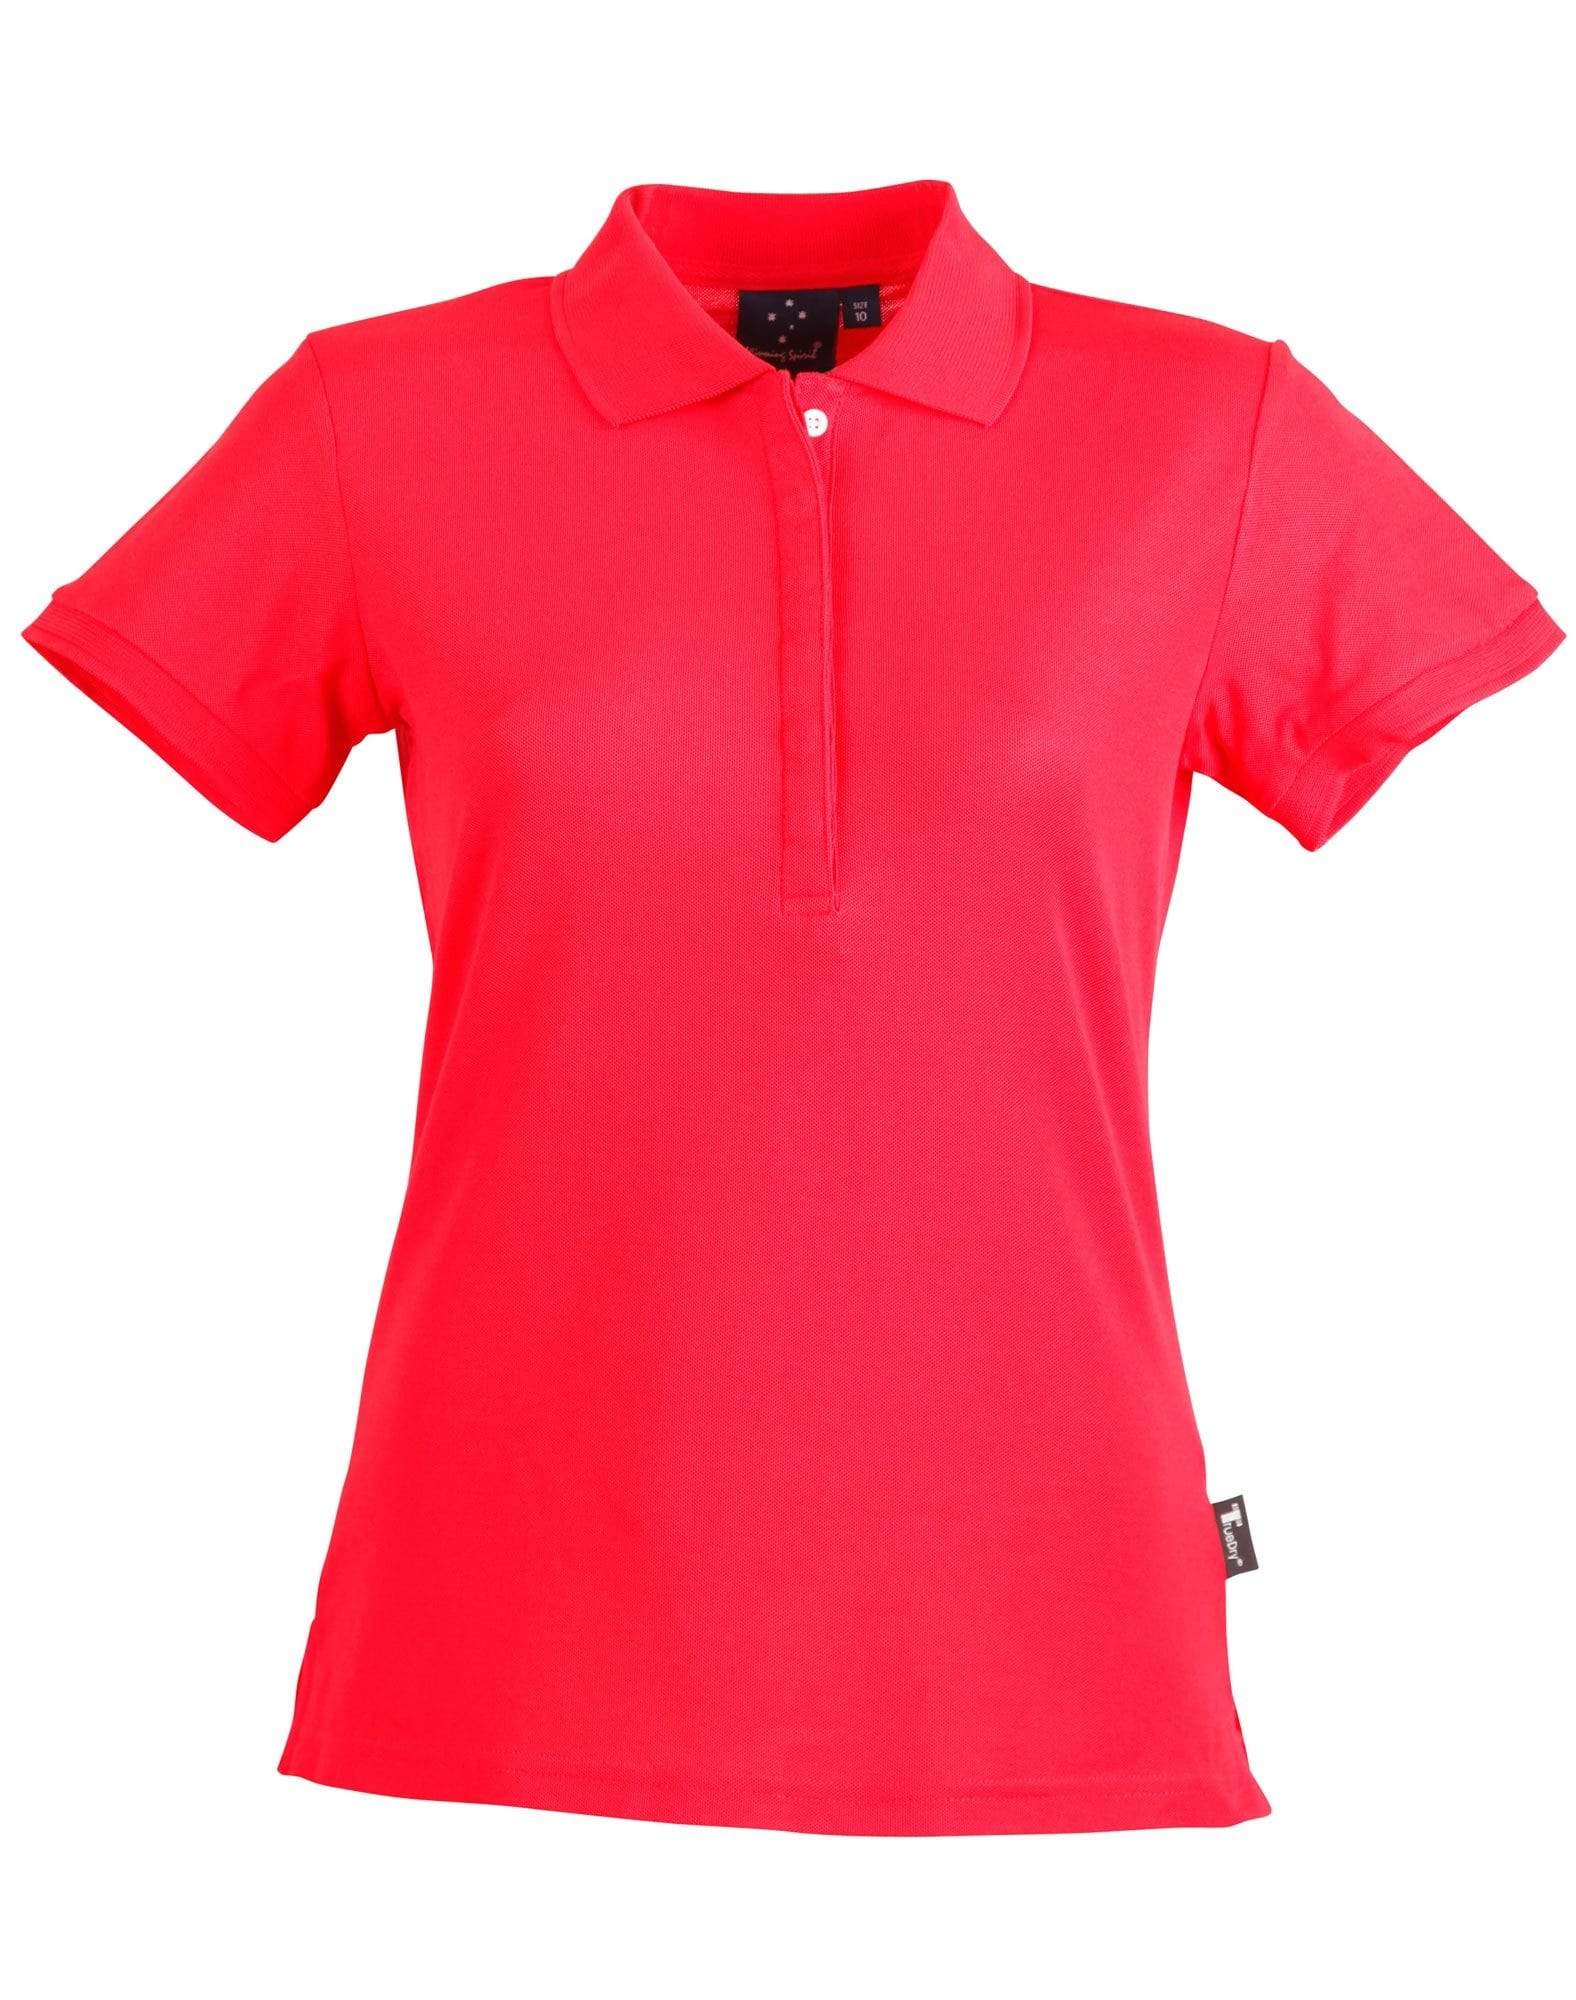 Connection Polo Ladies' Ps64 Casual Wear Winning Spirit Red 8 